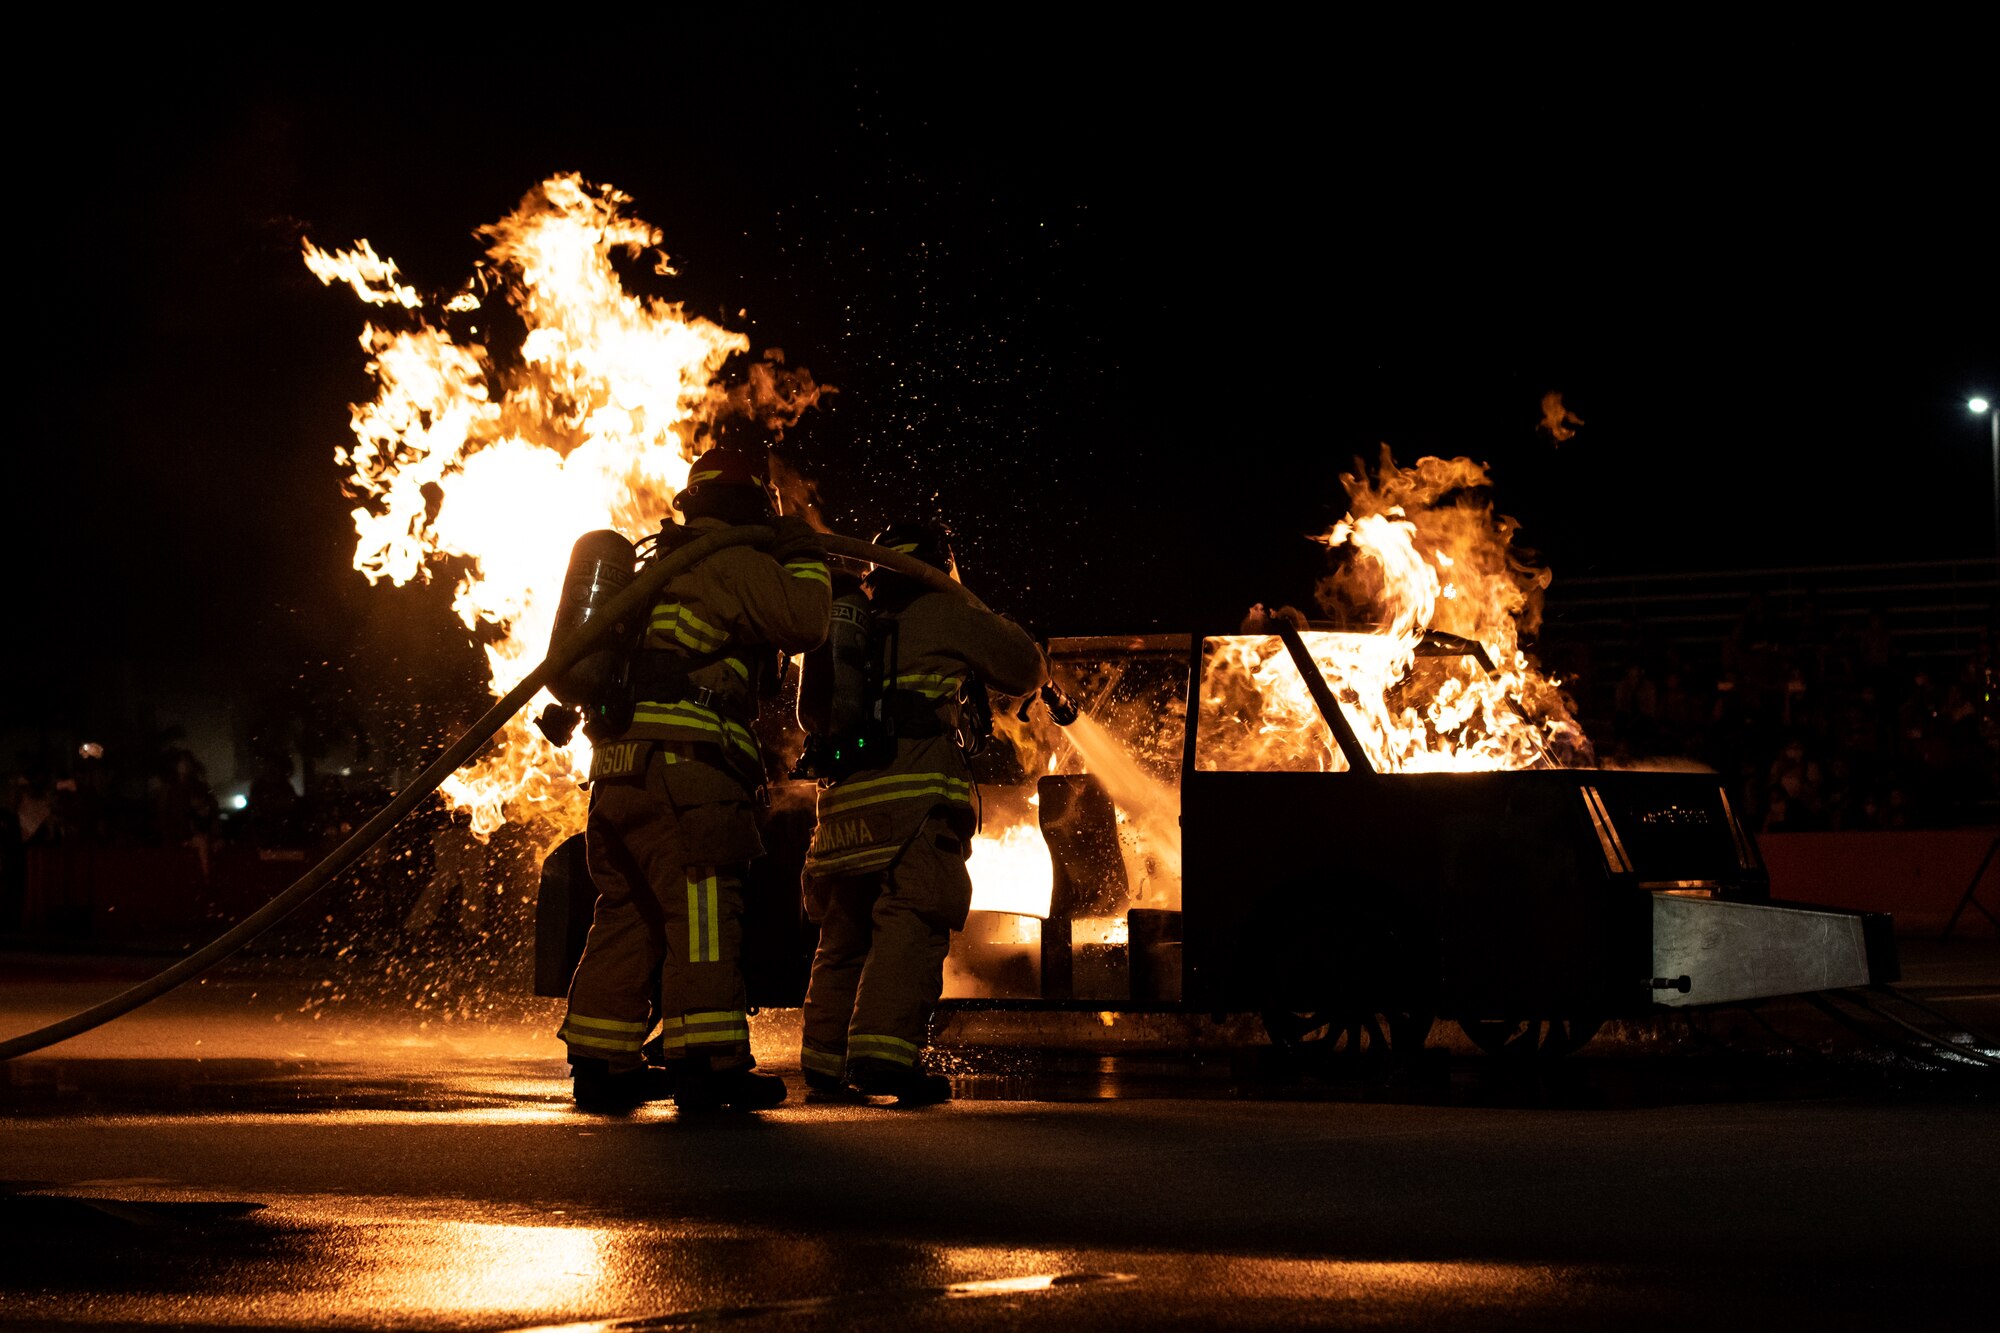 U.S. Air Force Staff Sgt. Garrett Morrison, 18th Civil Engineering Squadron firefighter, left, and Reiki Hokama, 18th CES firefighter, fight a simulated car fire during a Fire Prevention Week demonstration at Kadena Air Base, Japan, Oct. 7, 2021. Since 1922, FPW has been observed annually during the week of Oct. 9 in remembrance of the Great Chicago Fire of 1871. (U.S. Air Force photo by Senior Airman Jessi Monte)